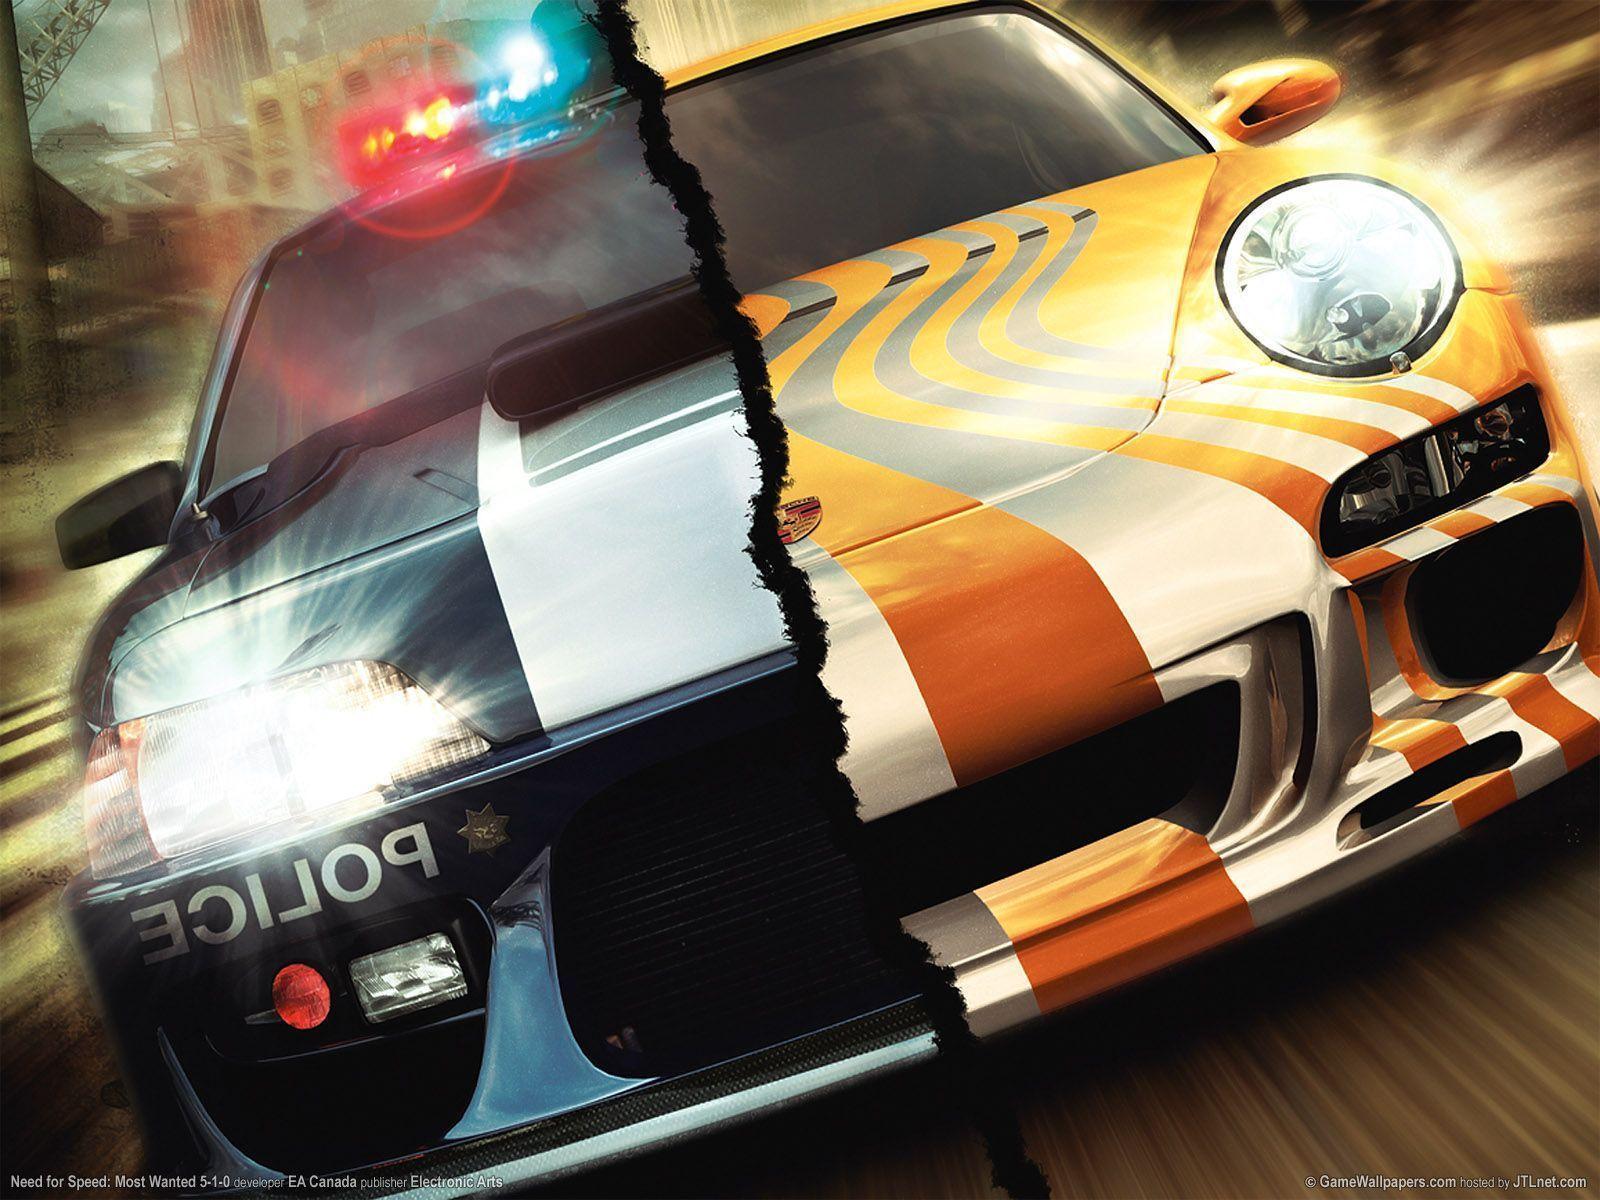 NFS wallpaper: most wanted two car wallpaper